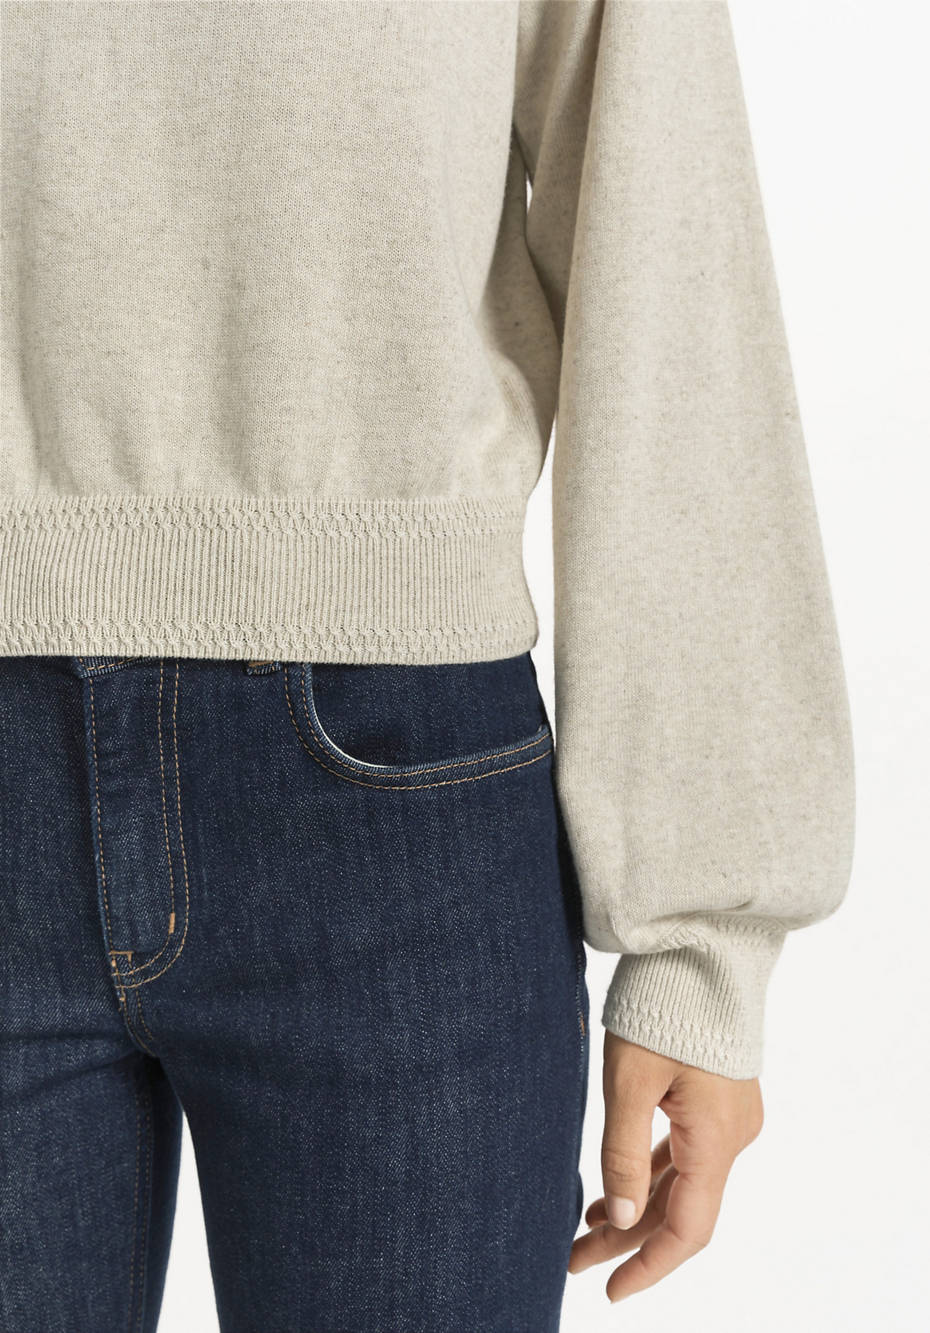 Pure organic cotton sweater with linen